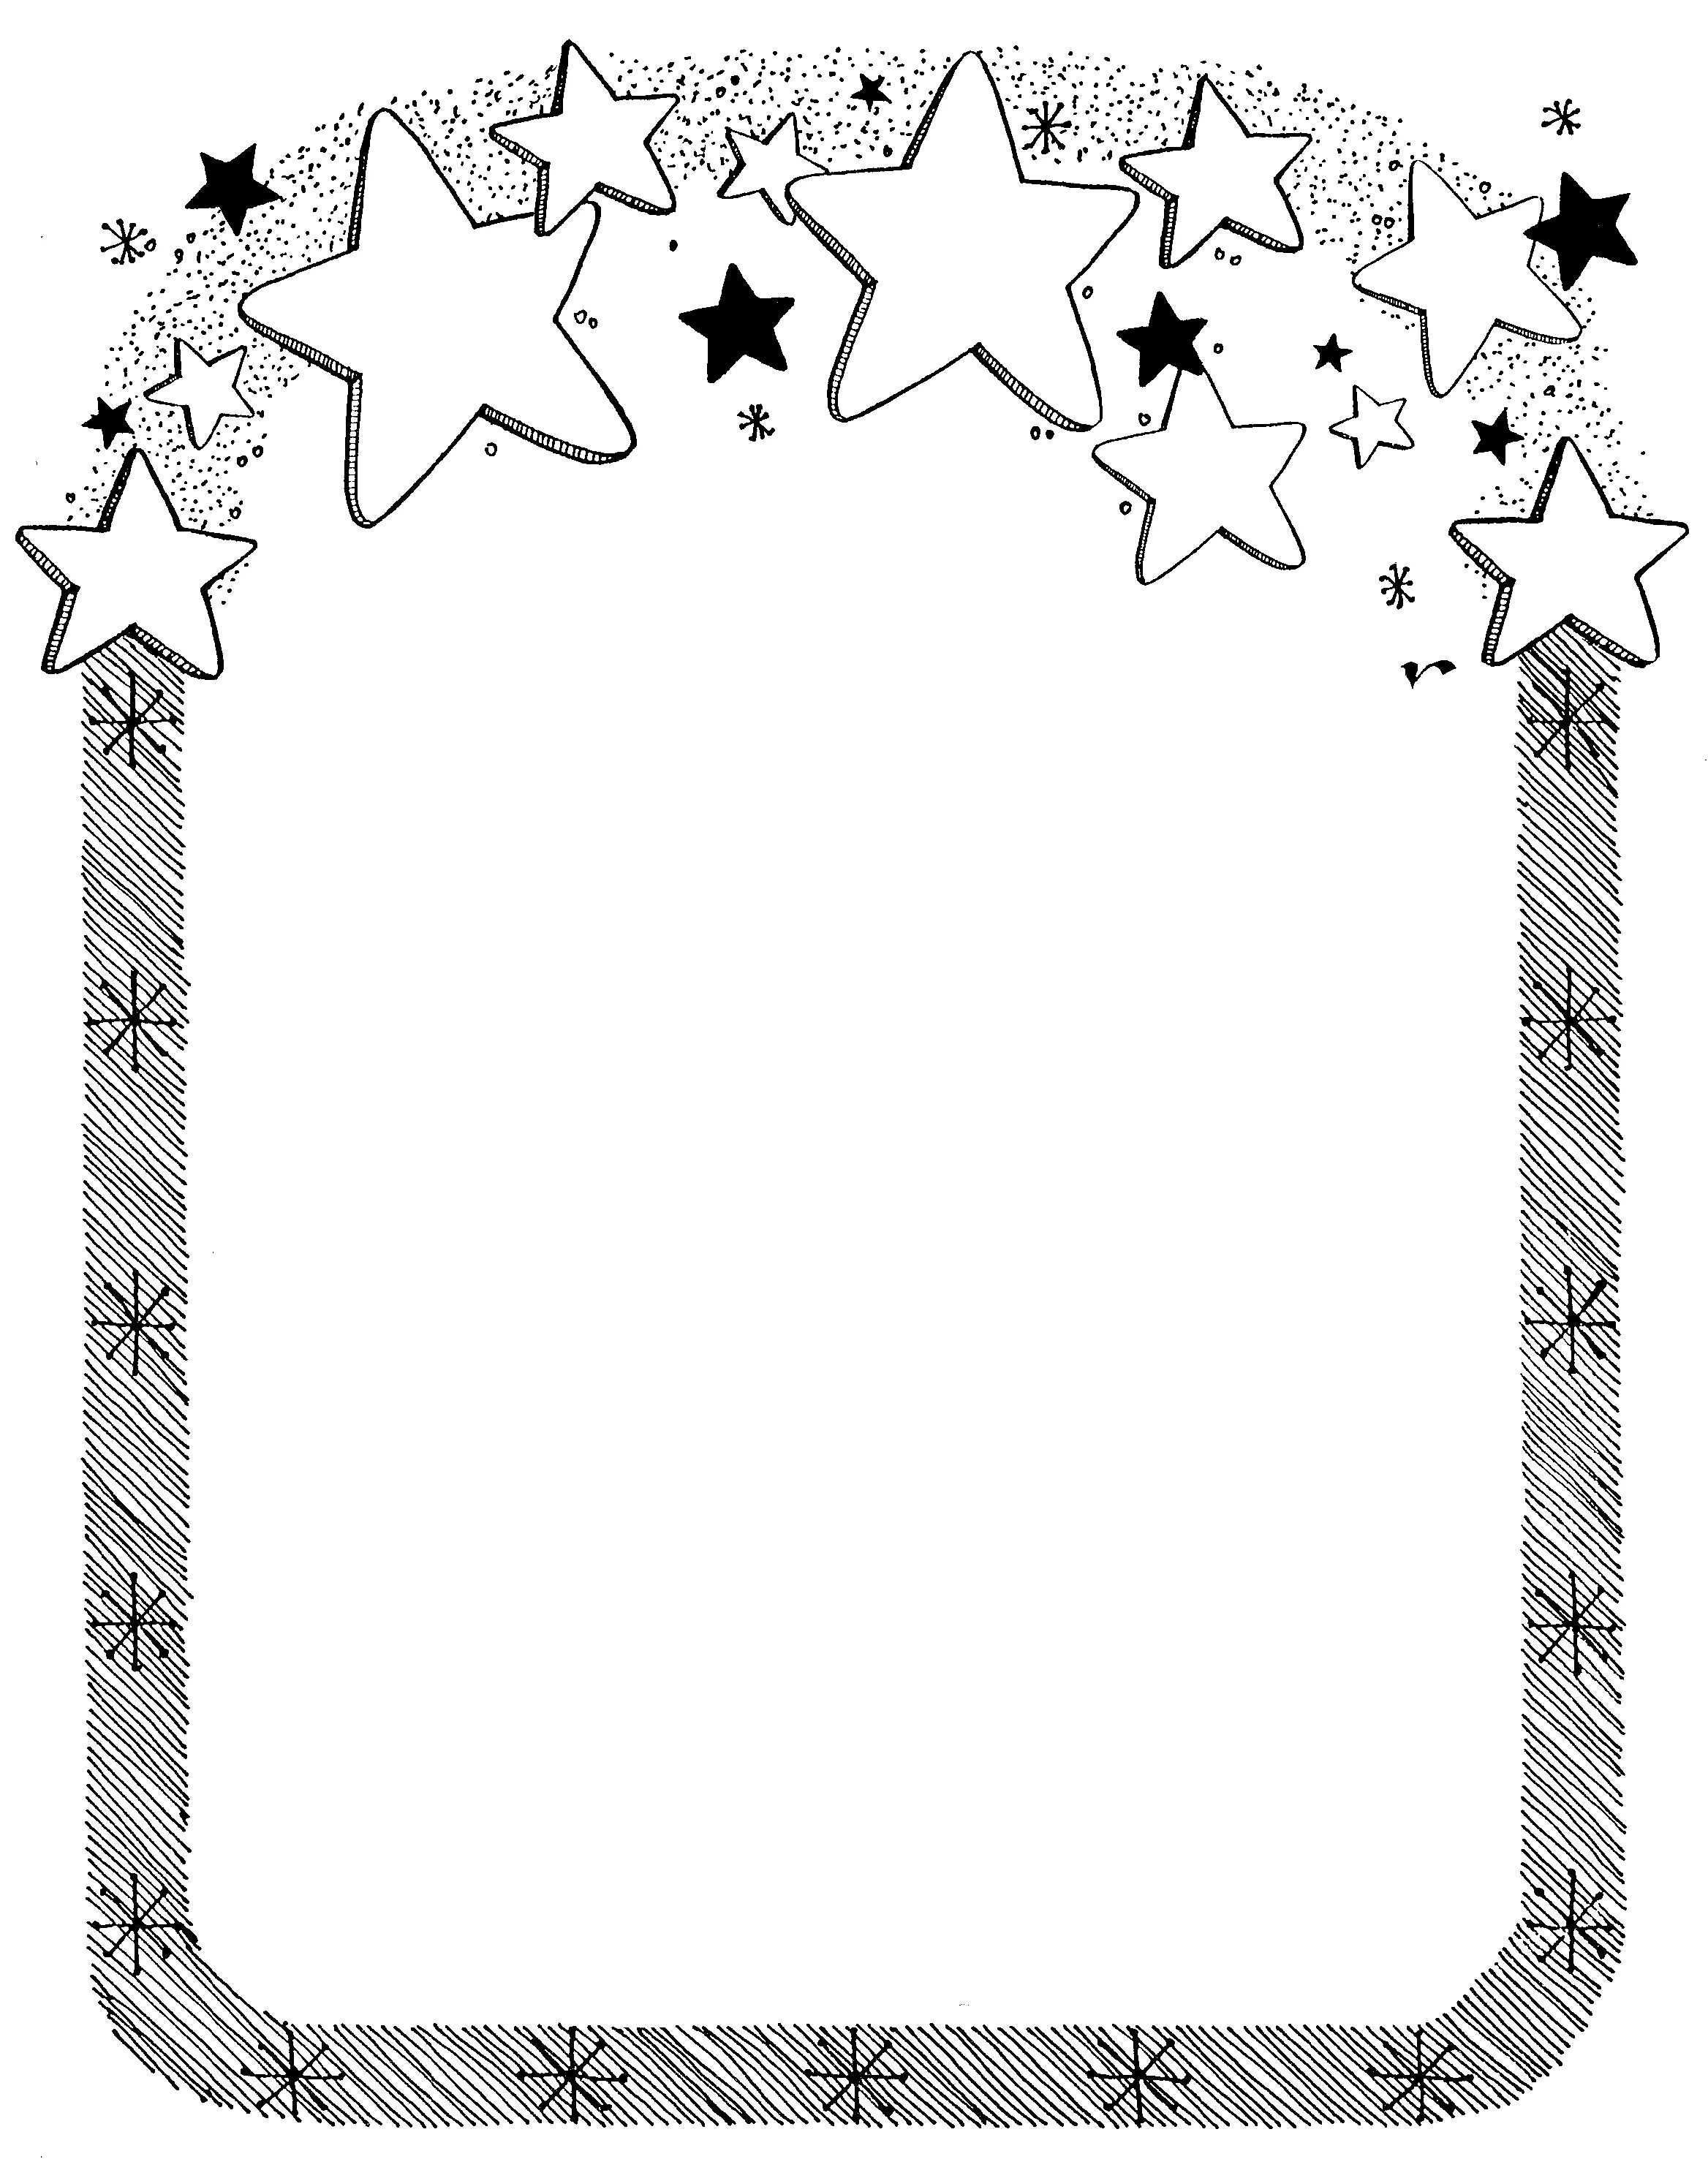 Exuberant coloring page frame February 23